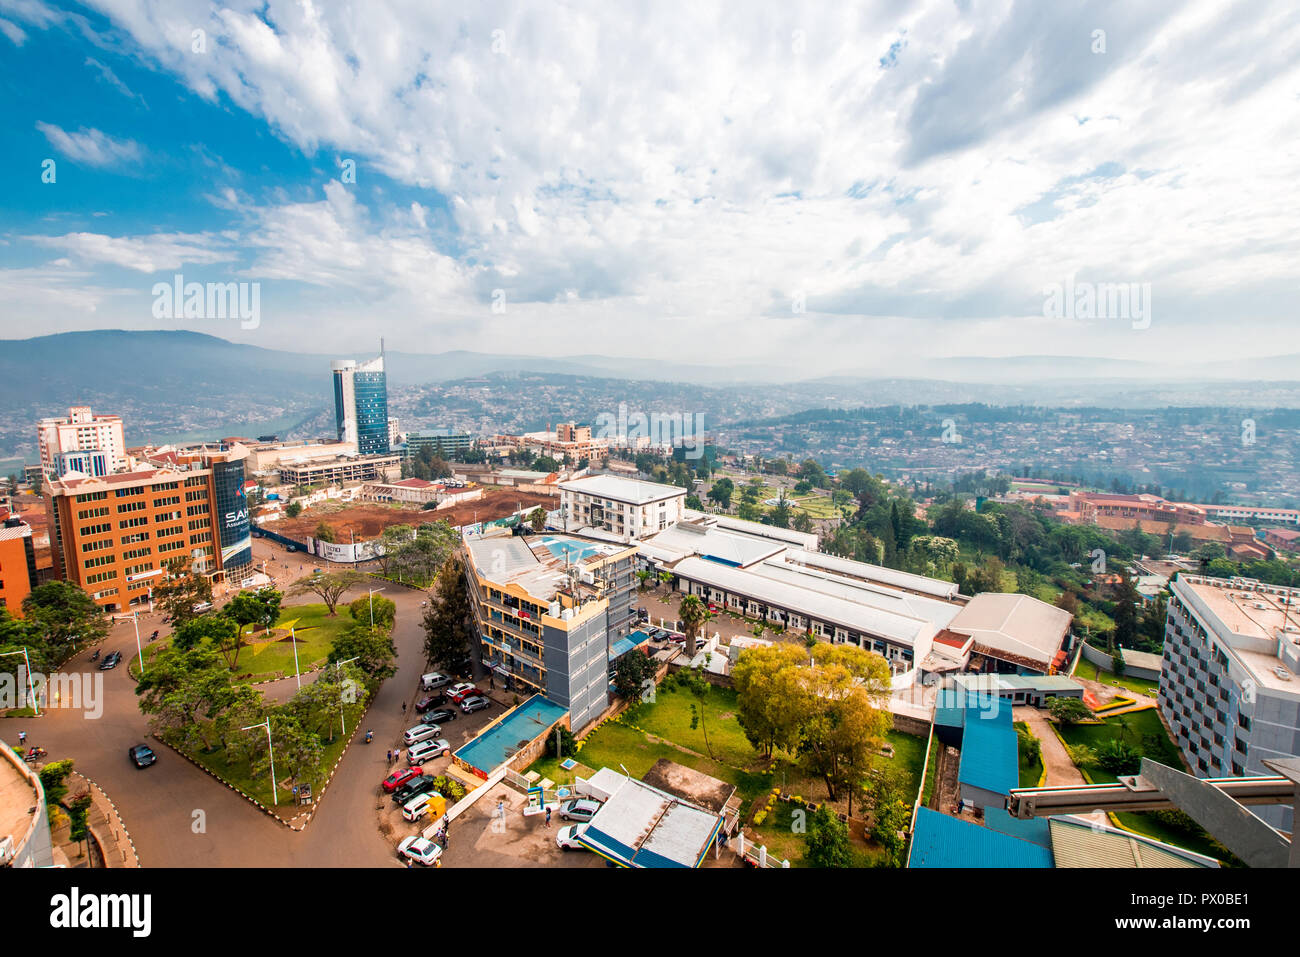 Kigali, Rwanda - September 21, 2018: a wide, sweeping panorama of the city centre with Kigali City Tower against the backdrop of distant blue hills Stock Photo